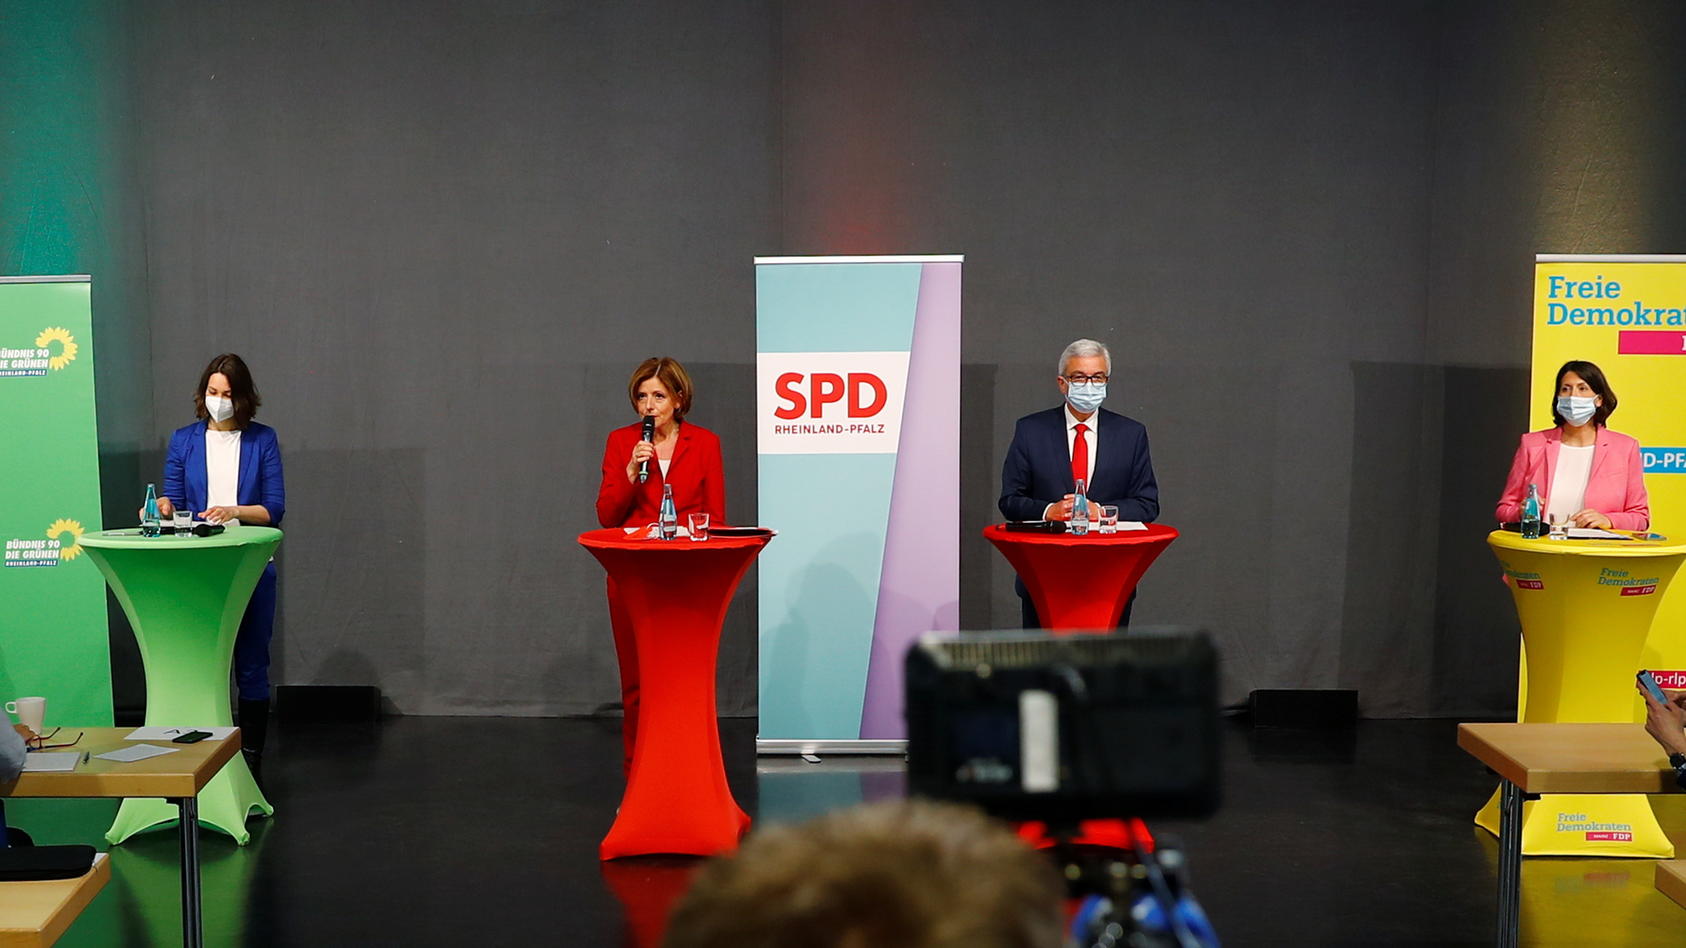 State Prime Minister Malu Dreyer of the Social Democratic Party (SPD) speaks next to Roger Lewentz of the Social Democratic Party (SPD), Volker Wissing and Daniele Schmitt of the Free Democratic Party's (FDP)  and Alliance 90/The Greens party leaders